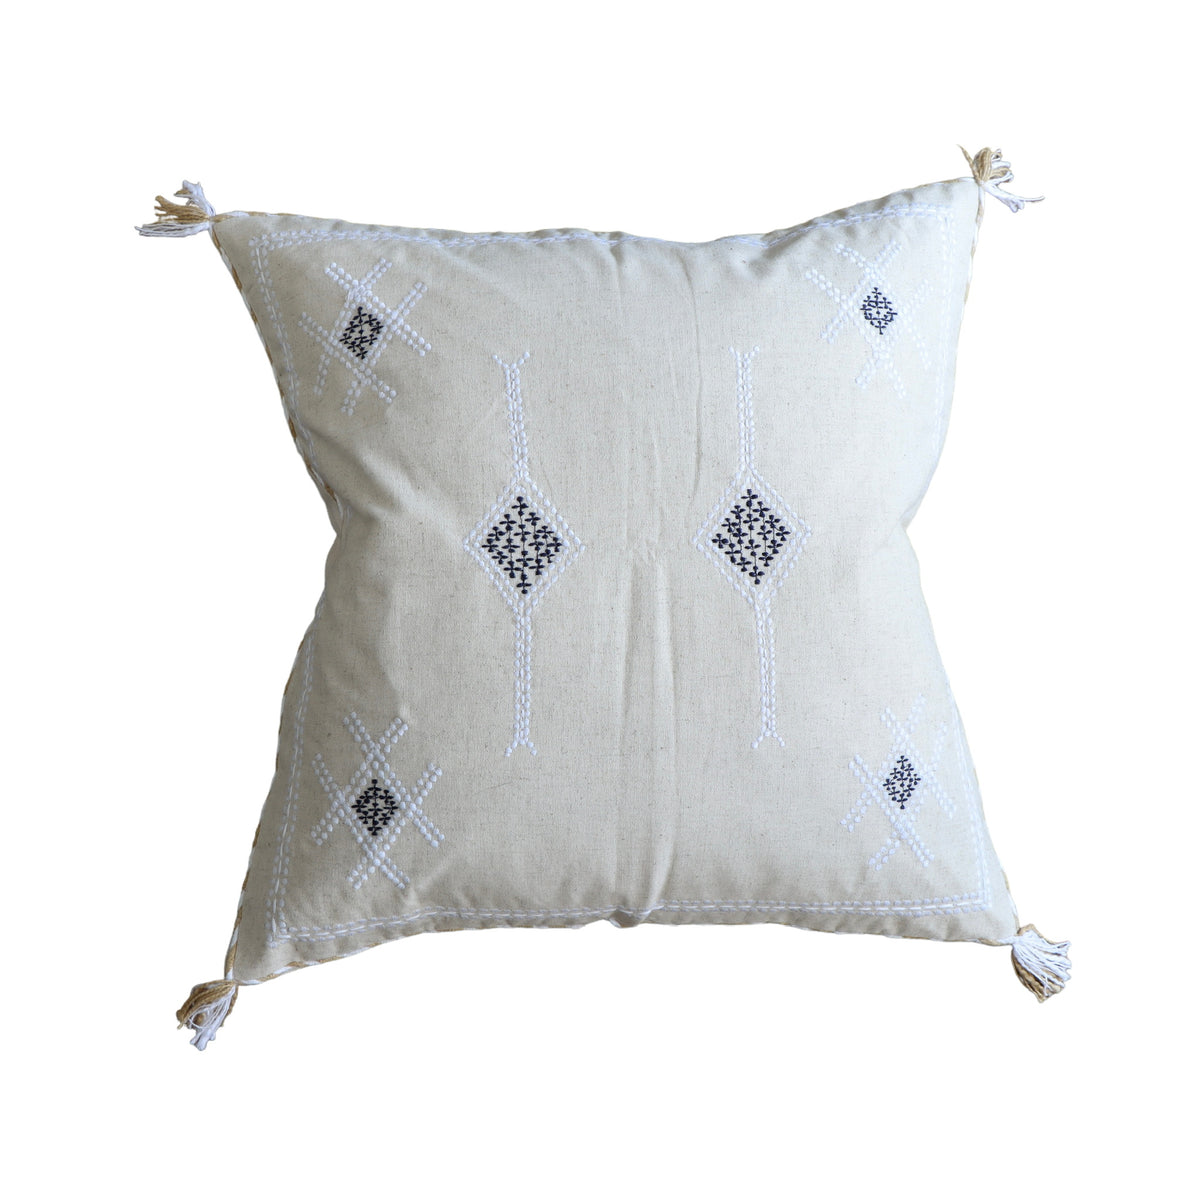 Jaya Linen Embroidered Pillow Cover - 20 Inch - Holistic Habitat 